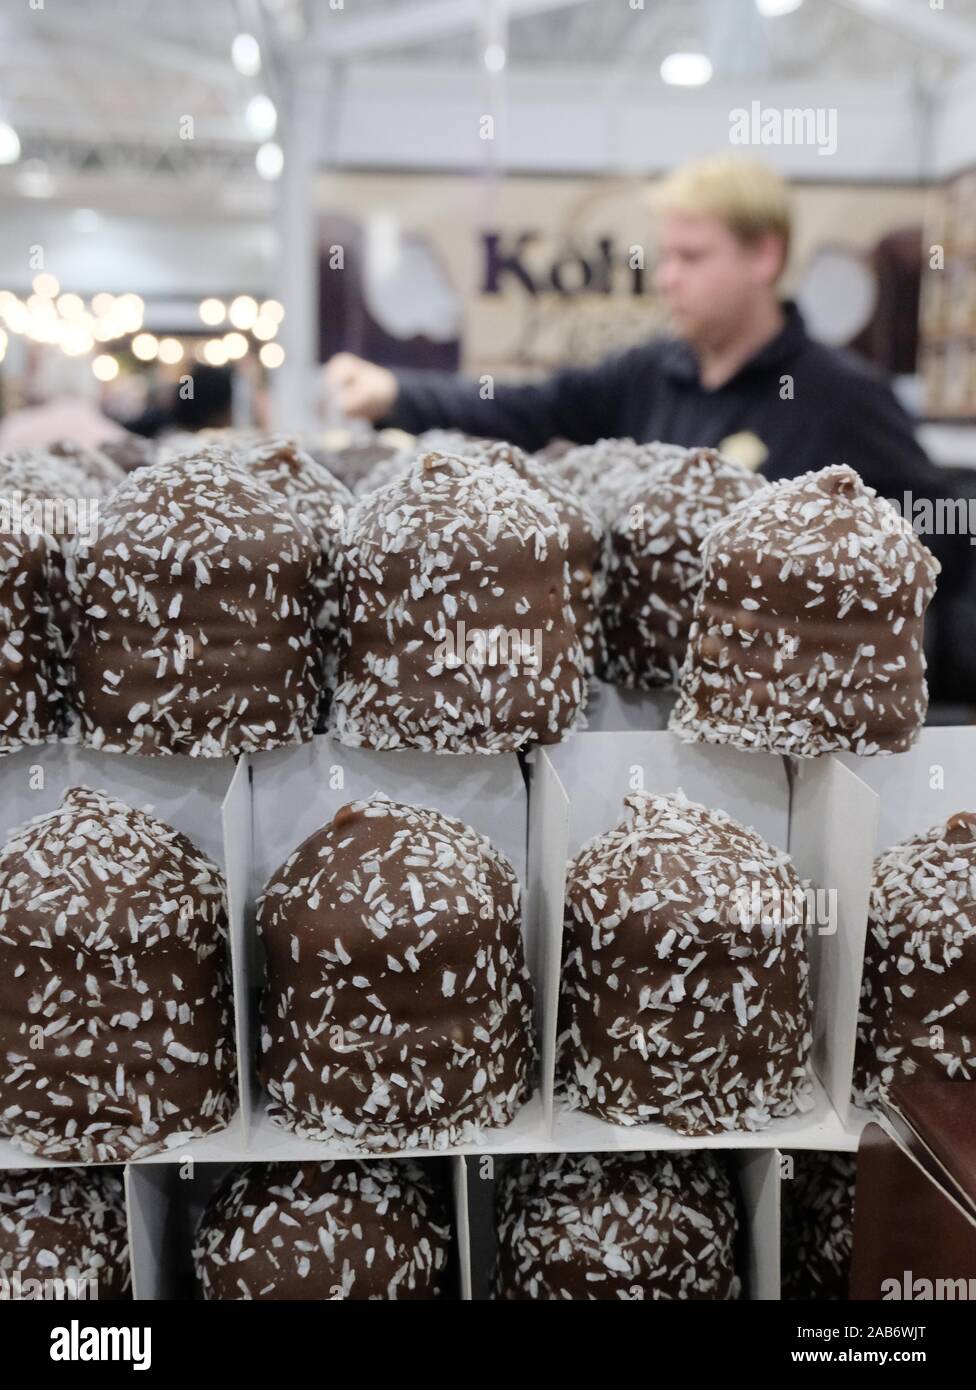 Vendor selling Schaumkuss (chocolate coated marshmallows) at the Ideal Home Christmas Show. Stock Photo